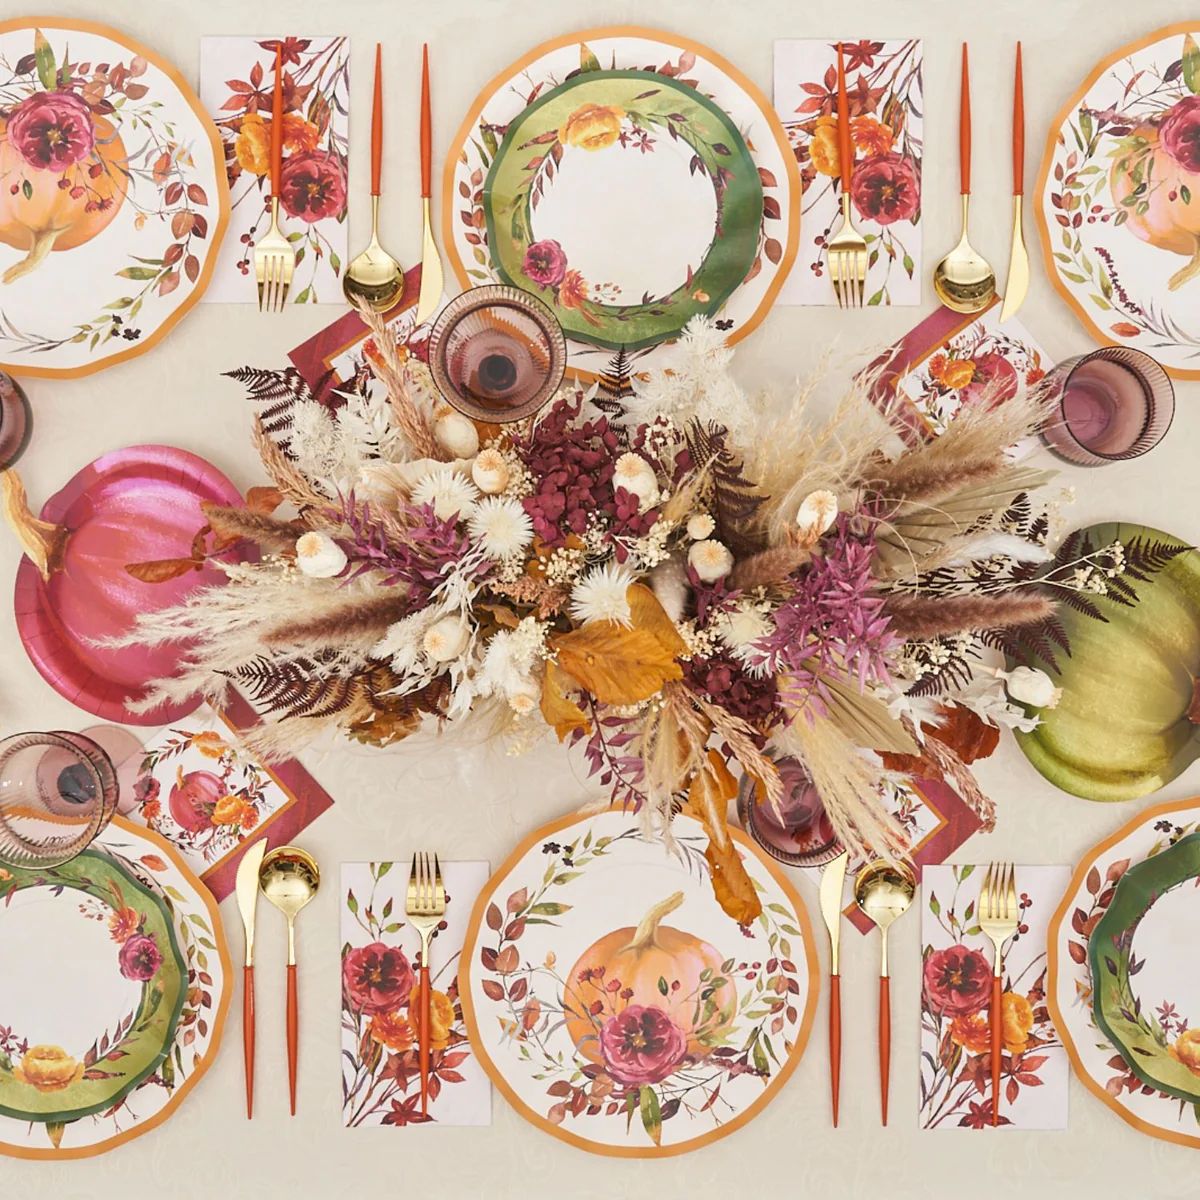 Autumn Bouquet Table Setting | Sophistiplate